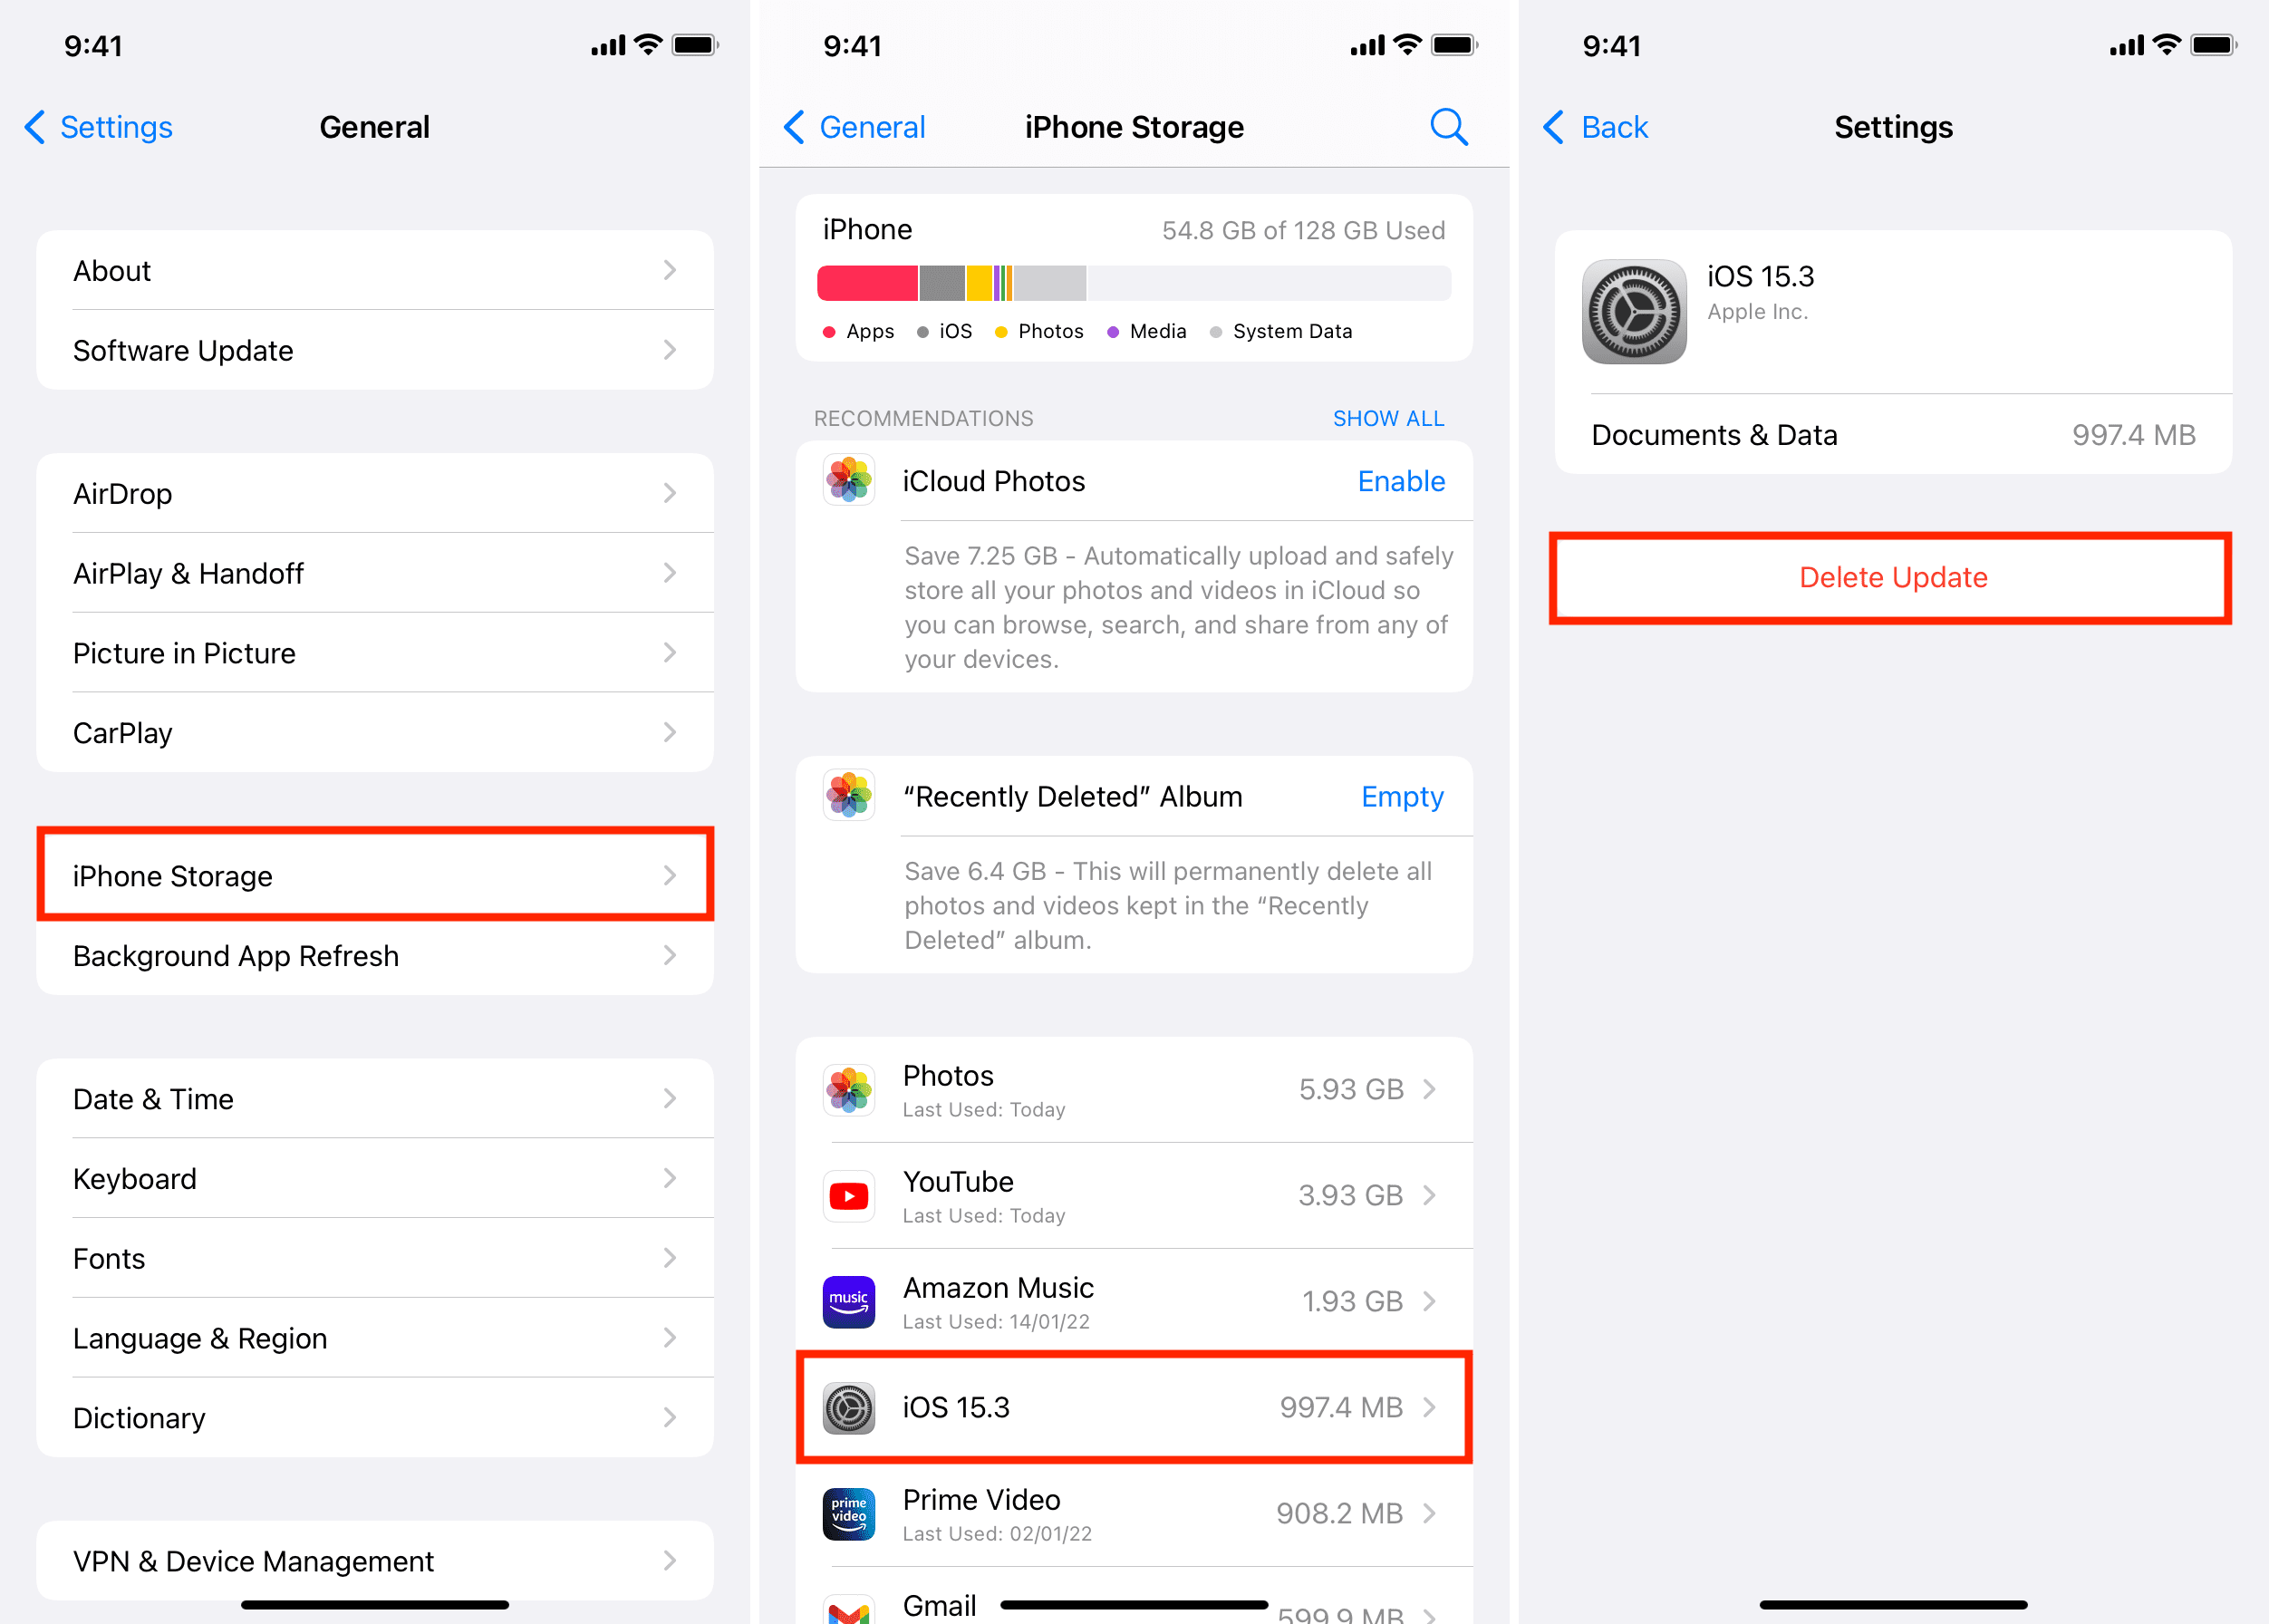 Delete Any Previous Update Files on iPhone